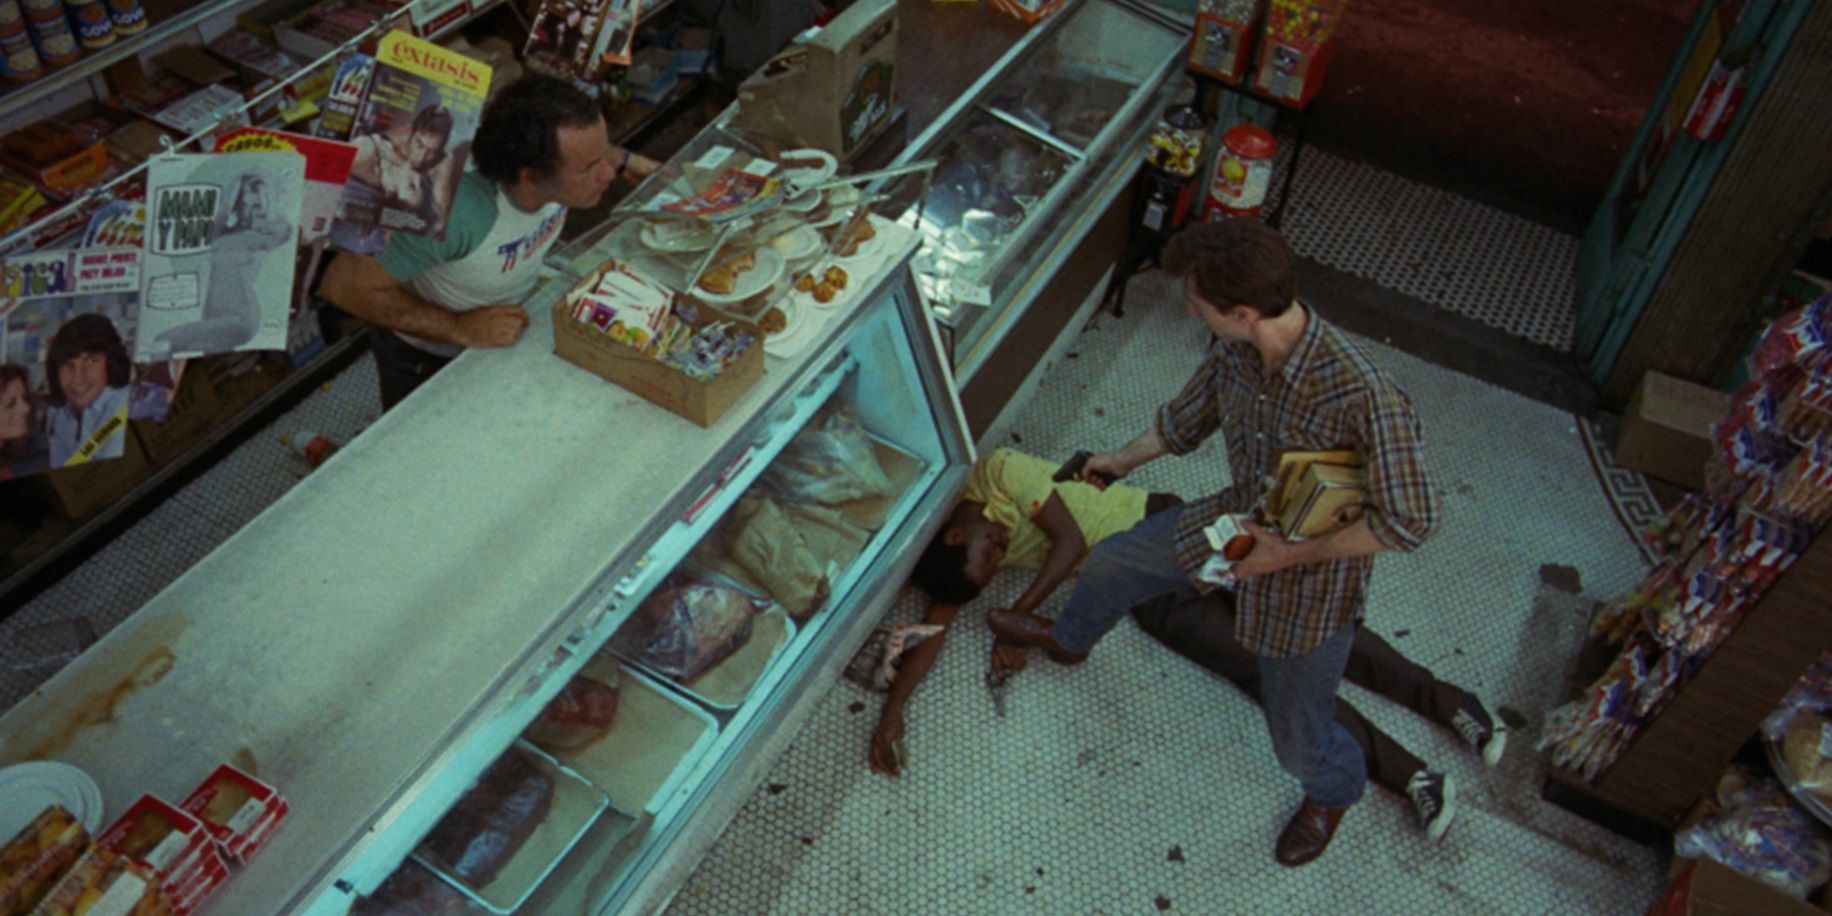 Travis thwarts a robbery in Taxi Driver.